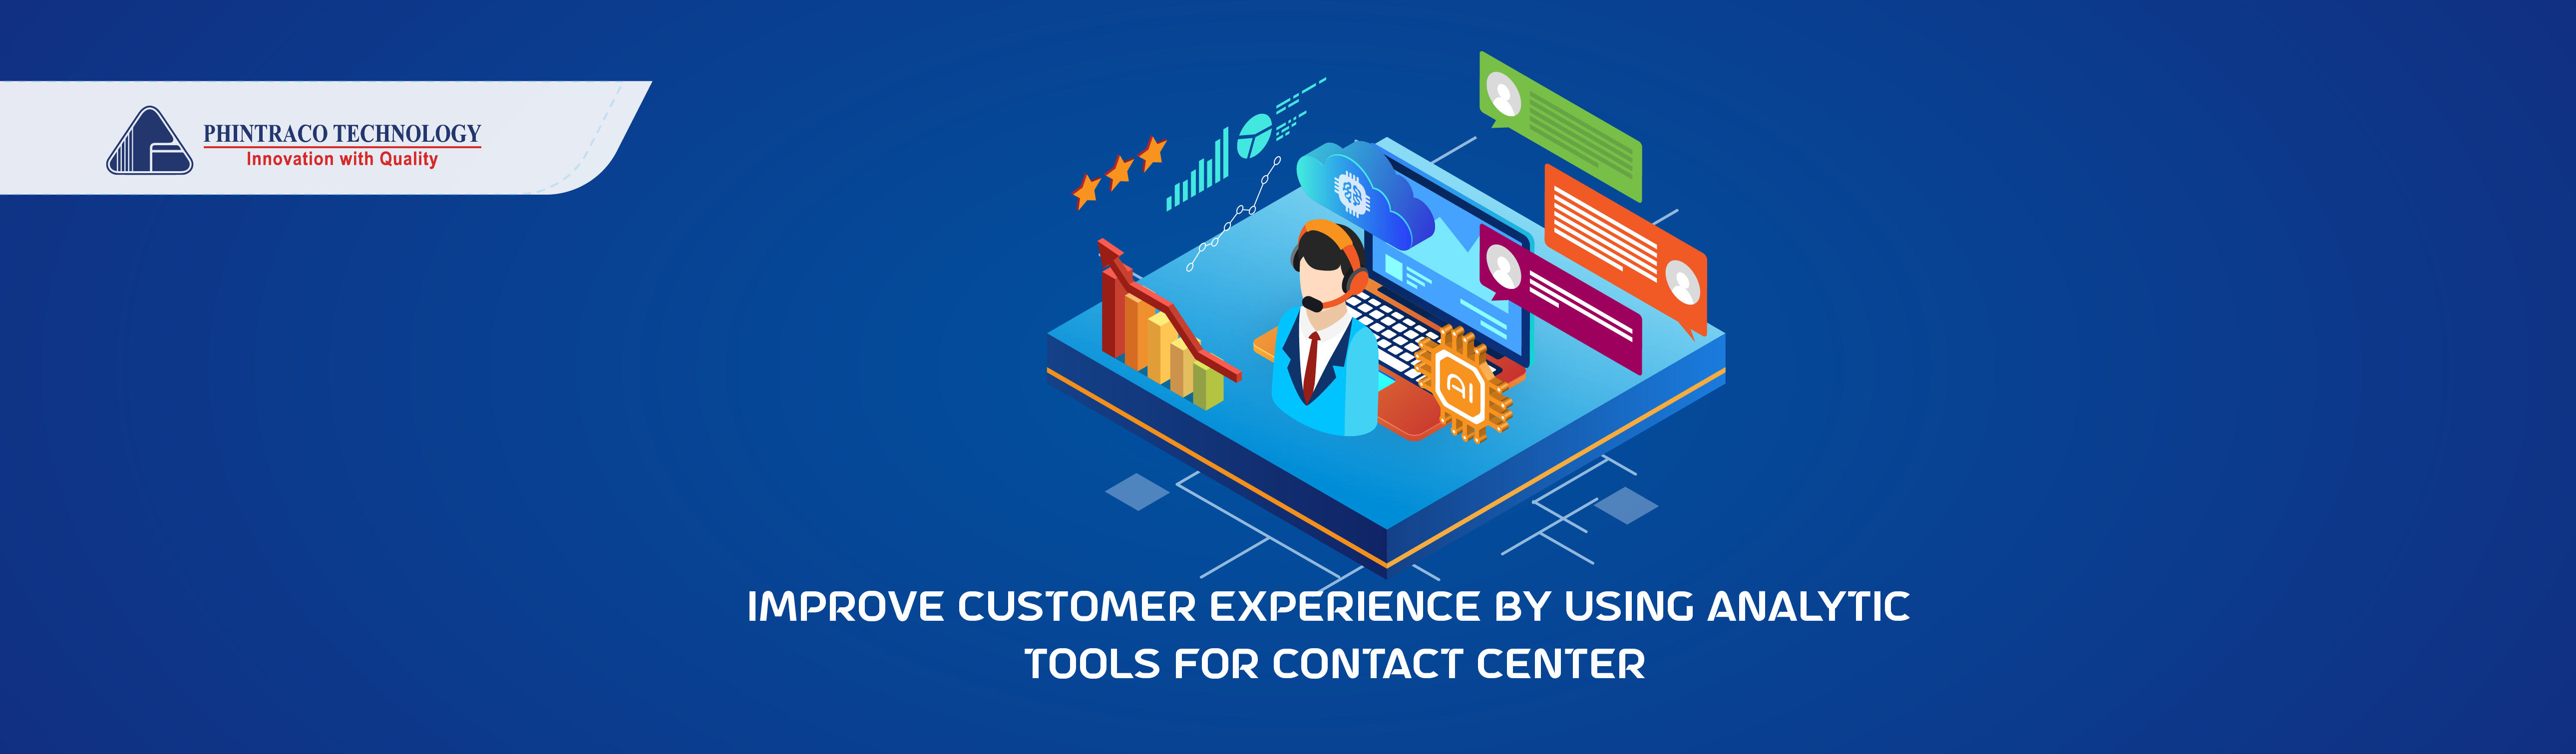 Improve Customer Experience by Using Analytics Tools for Contact Center